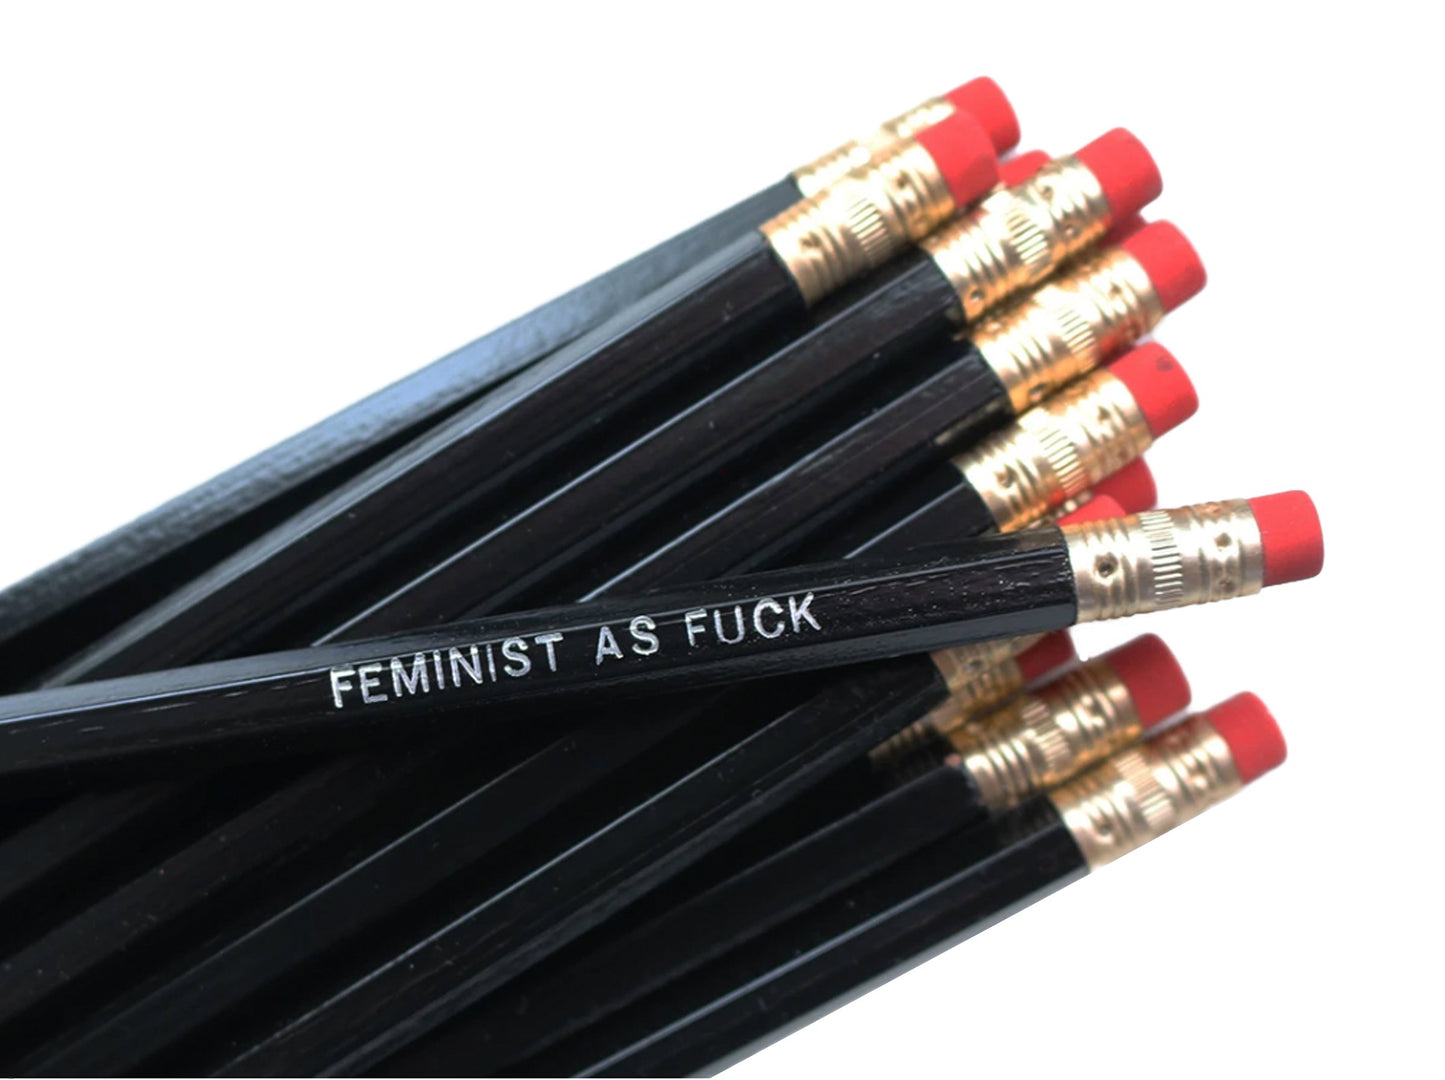 by Sweet Perversion. Listing for one Feminist As Fuck Pencil. Wood pencil with #2 lead, certified non-toxic, latex-free synthetic eraser and unsharpened.